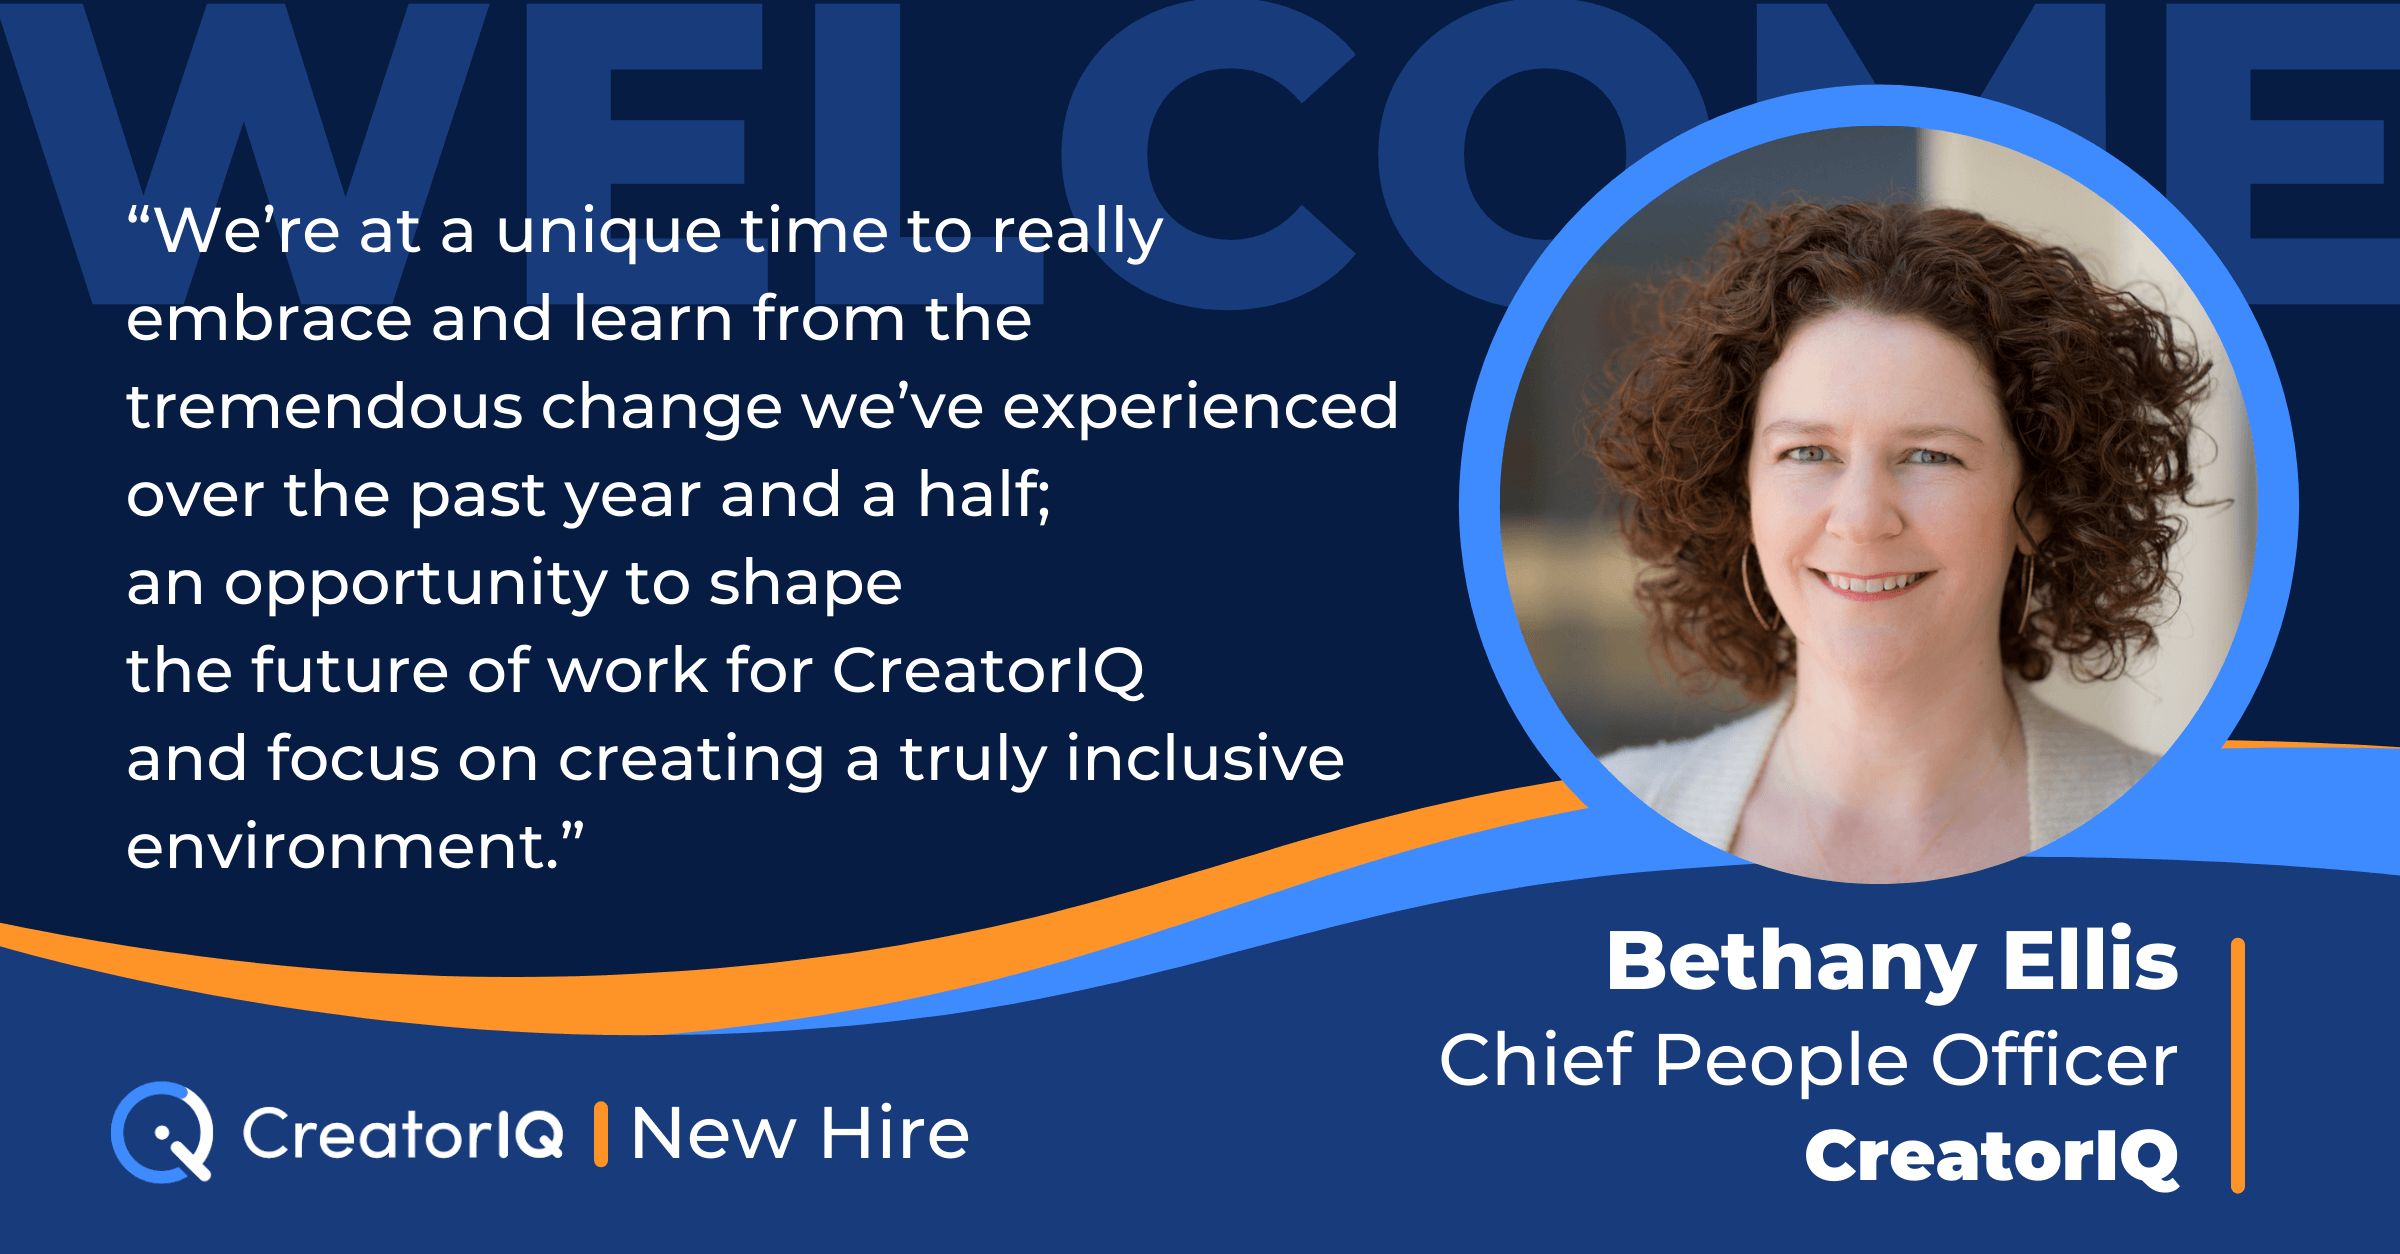 CreatorIQ Welcomes Bethany Ellis, Chief People Officer